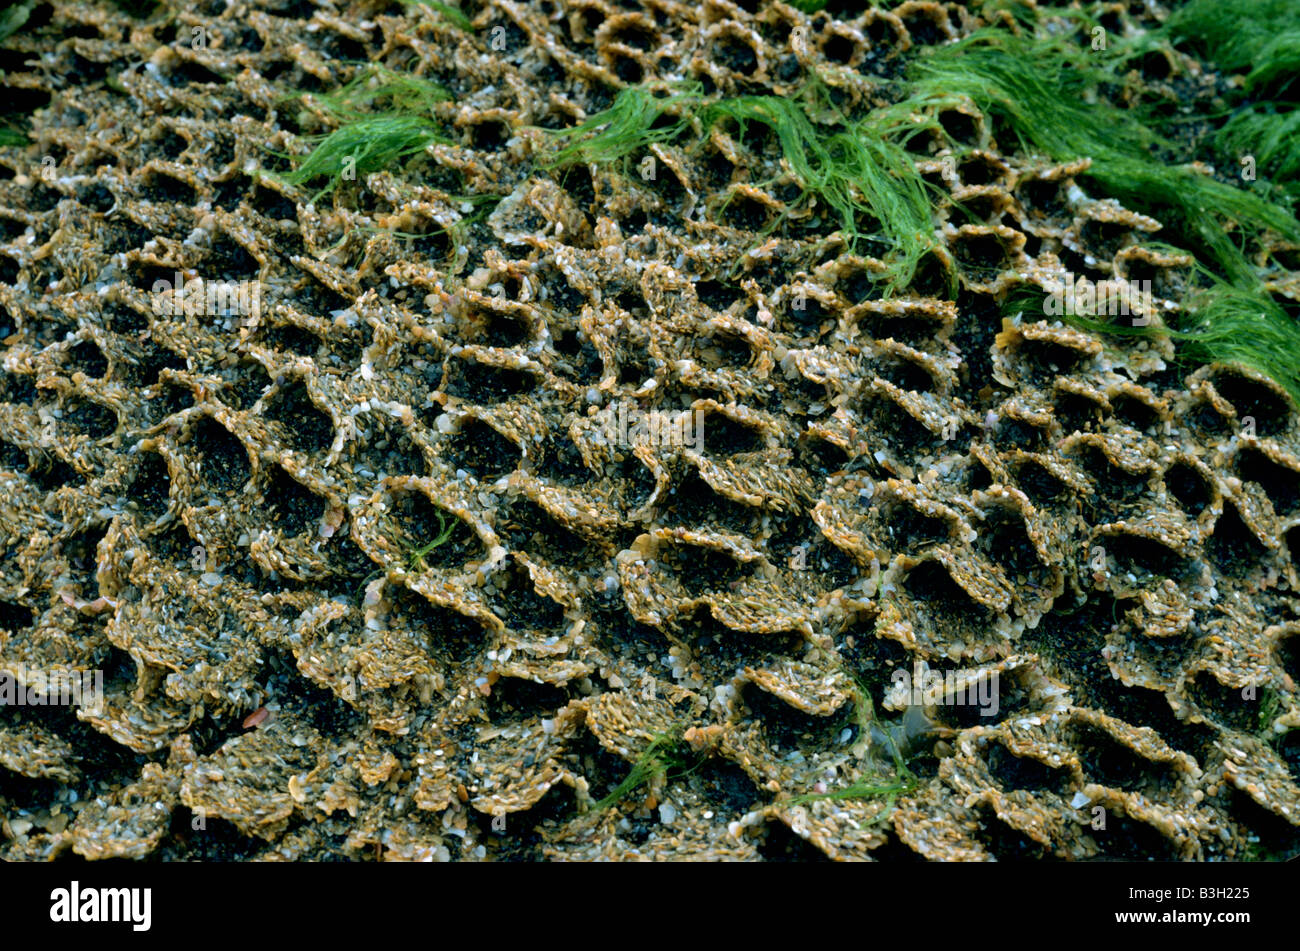 Honeycomb worm Sabellaria alveolata reef detail at low tide showig entrances to indiviual tubes made of sand grains Stock Photo